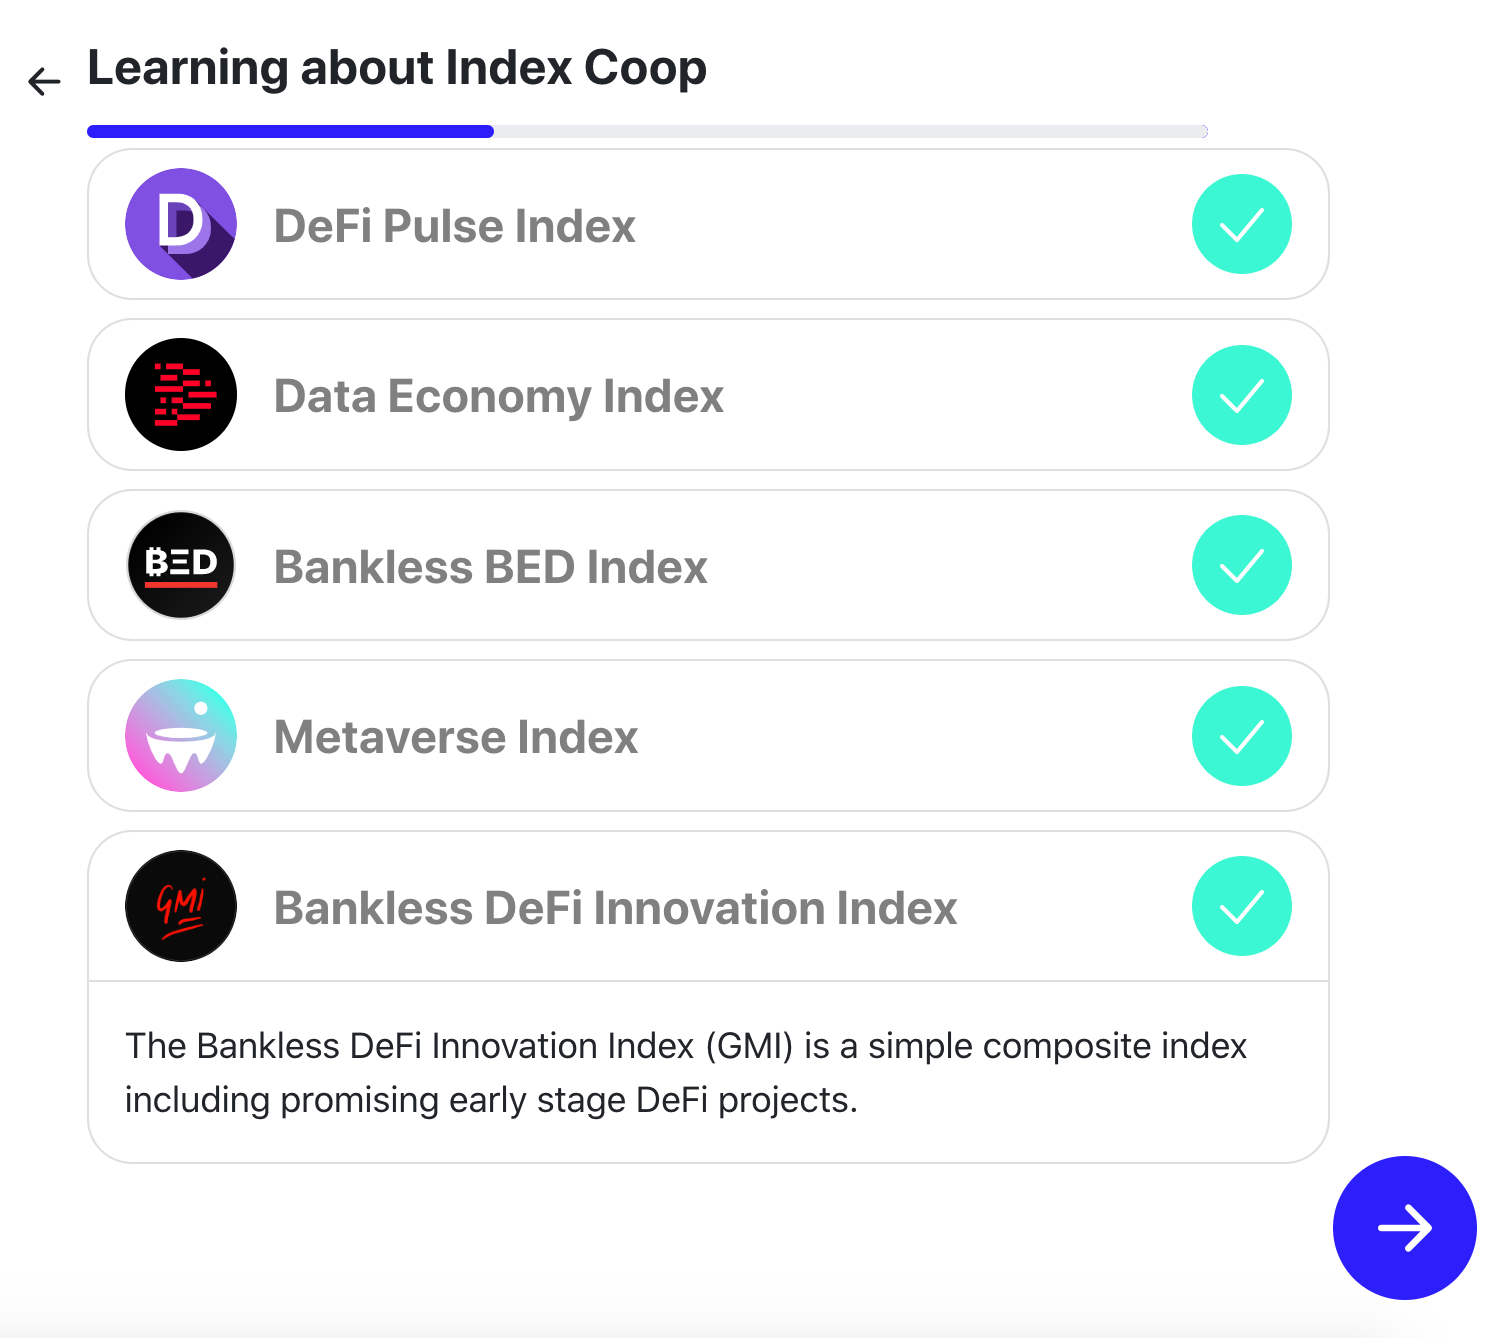 All of Index's products are linked and listed on their main page: https://indexcoop.com/products